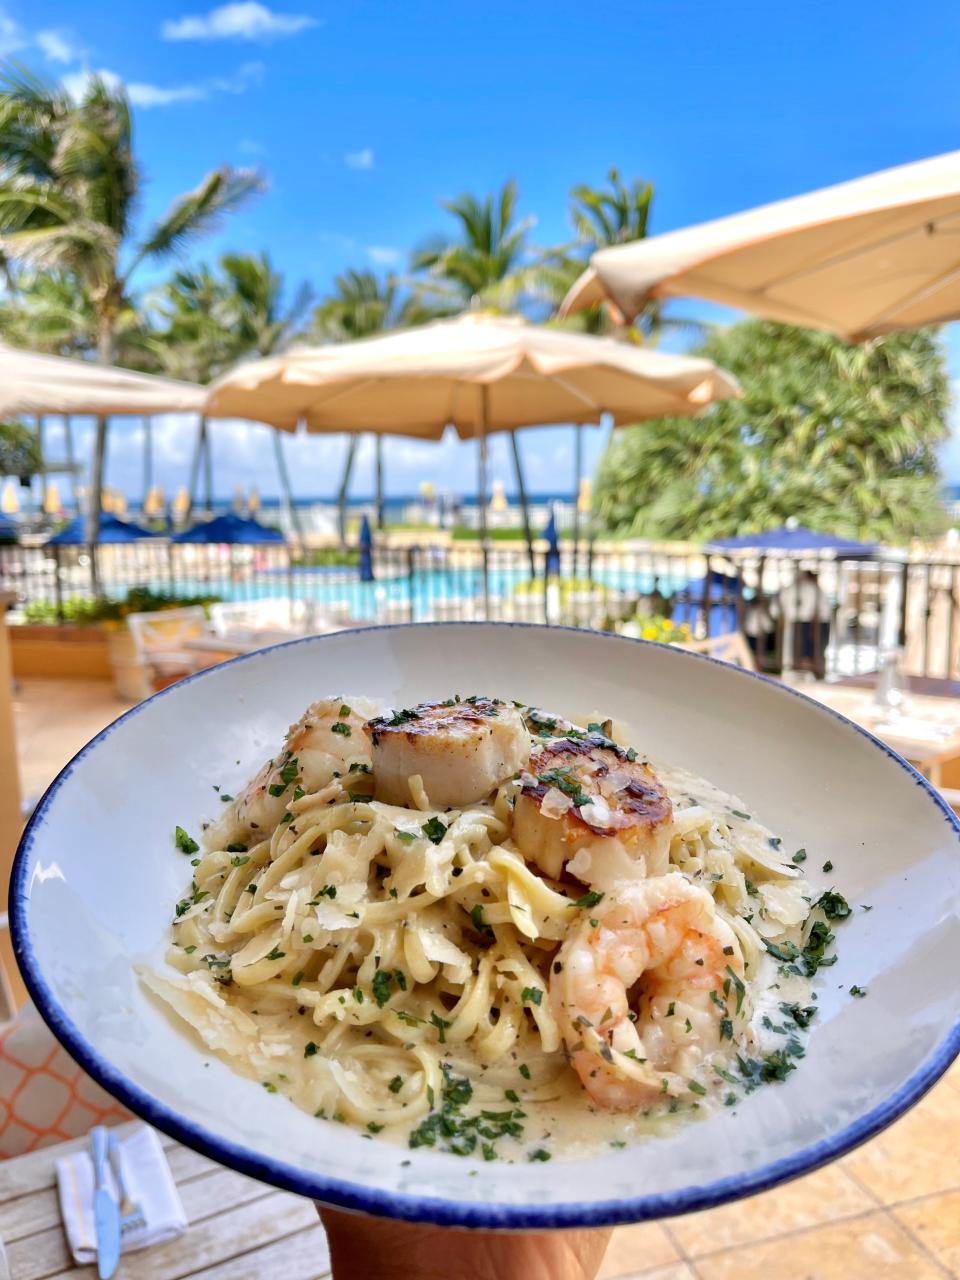 Breeze Ocean Kitchen at the Eau Palm Beach Resort has joined the August lineup for the newly expanded Palm Beaches Restaurant Month.